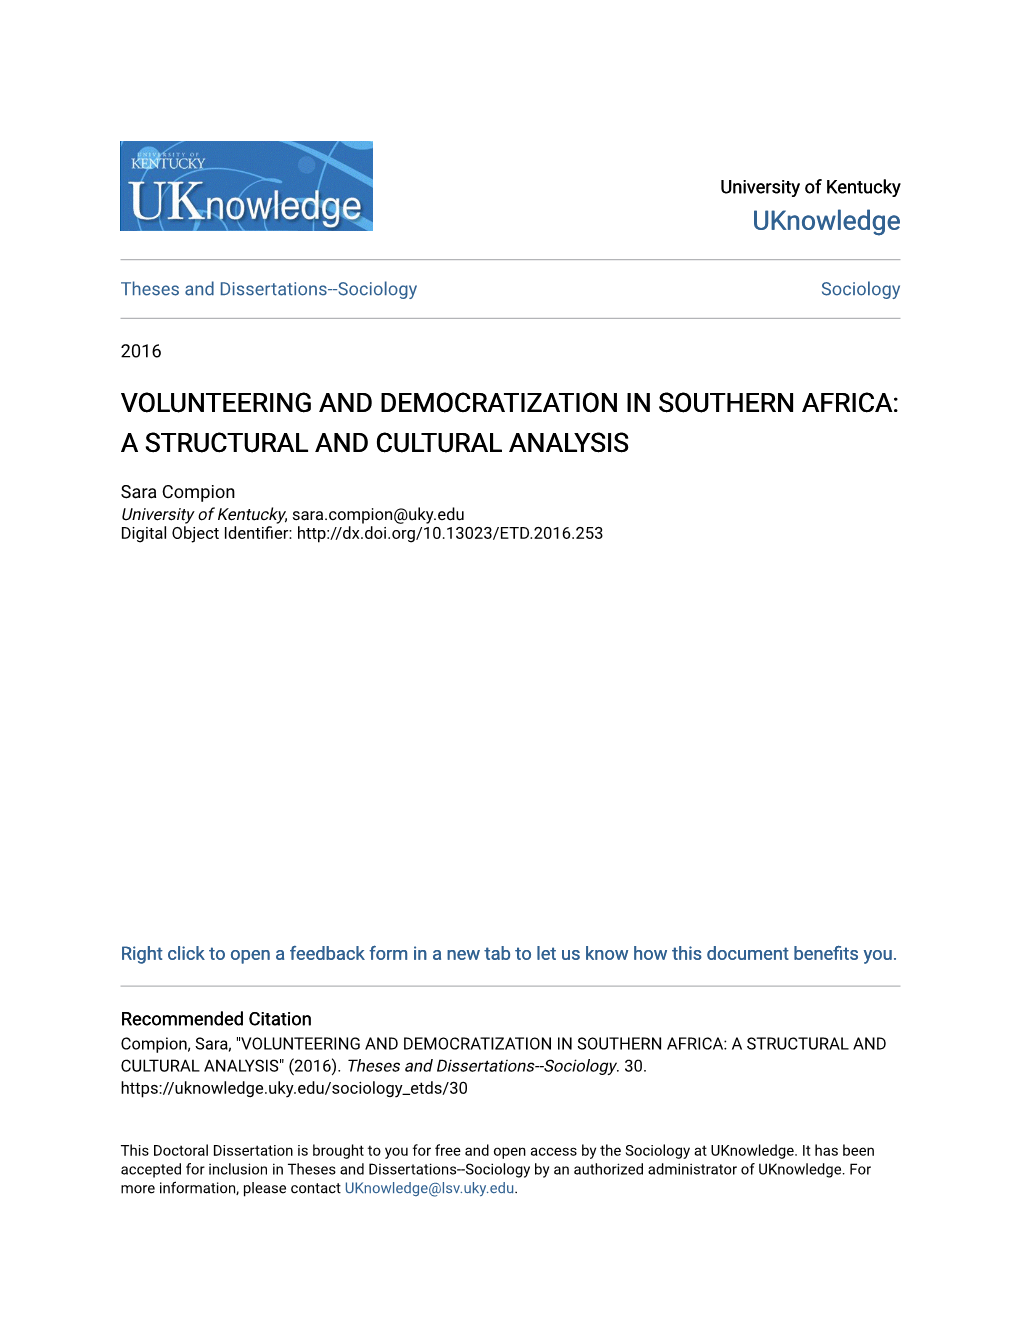 Volunteering and Democratization in Southern Africa: a Structural and Cultural Analysis